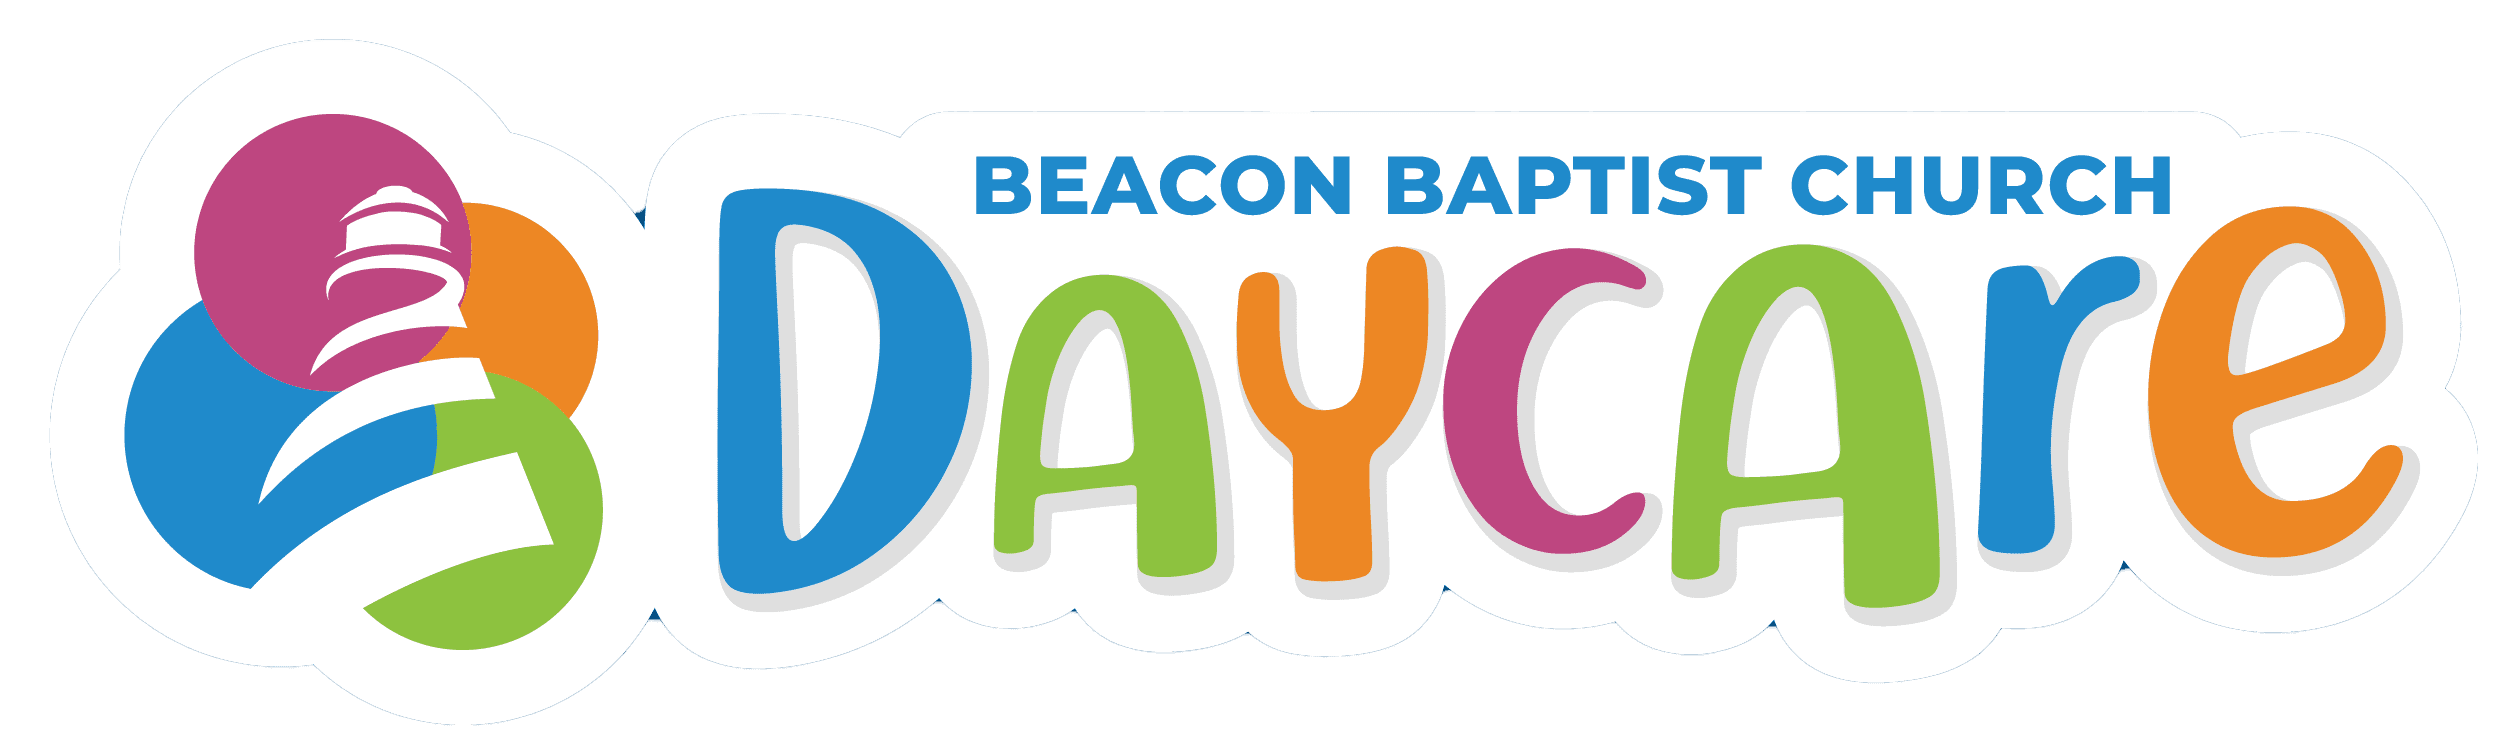 beacon_daycare_logo_light_with_background1